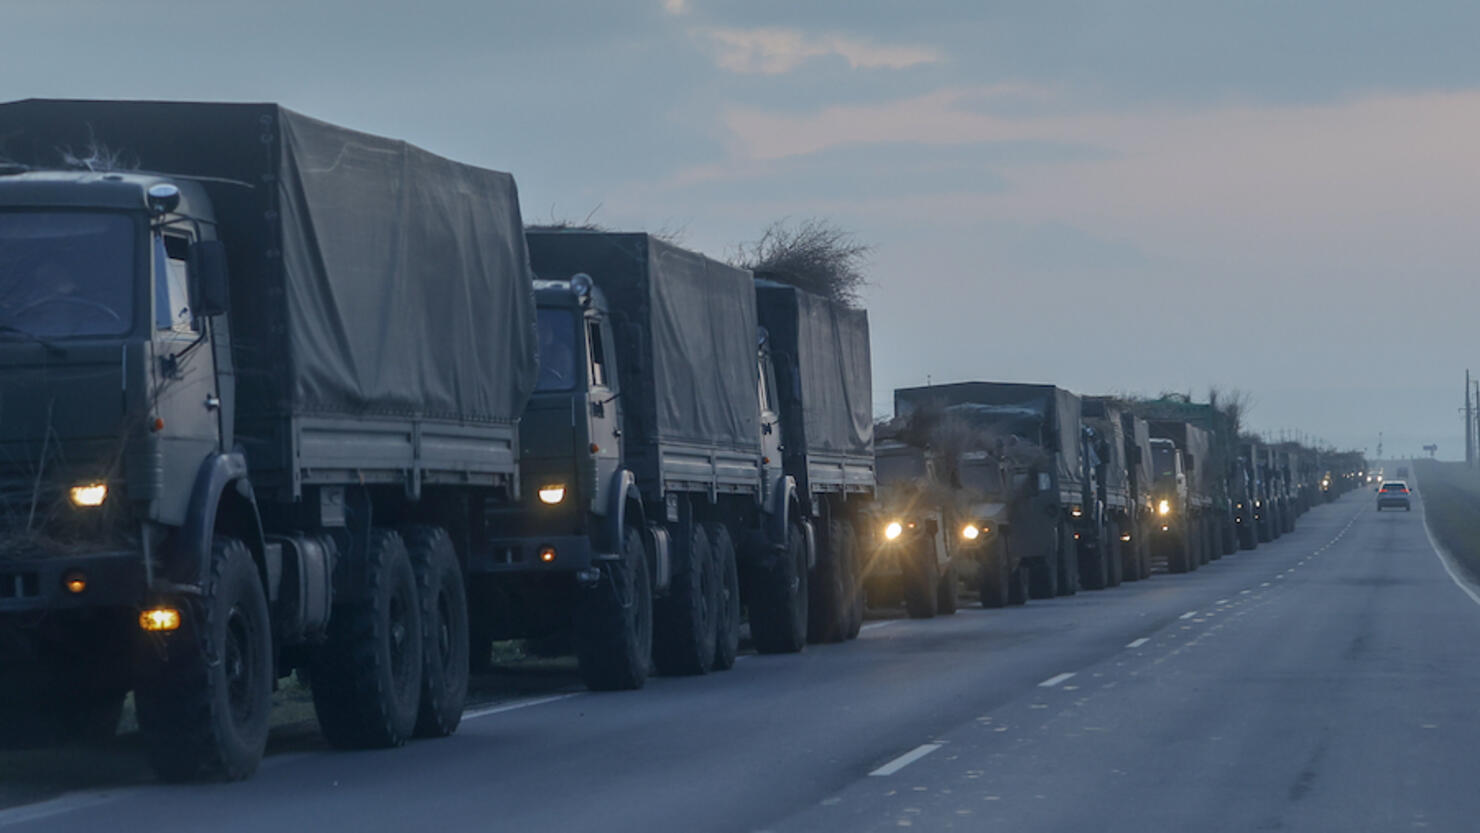 A convoy of Russian military vehicles moving towards border in Donbas region